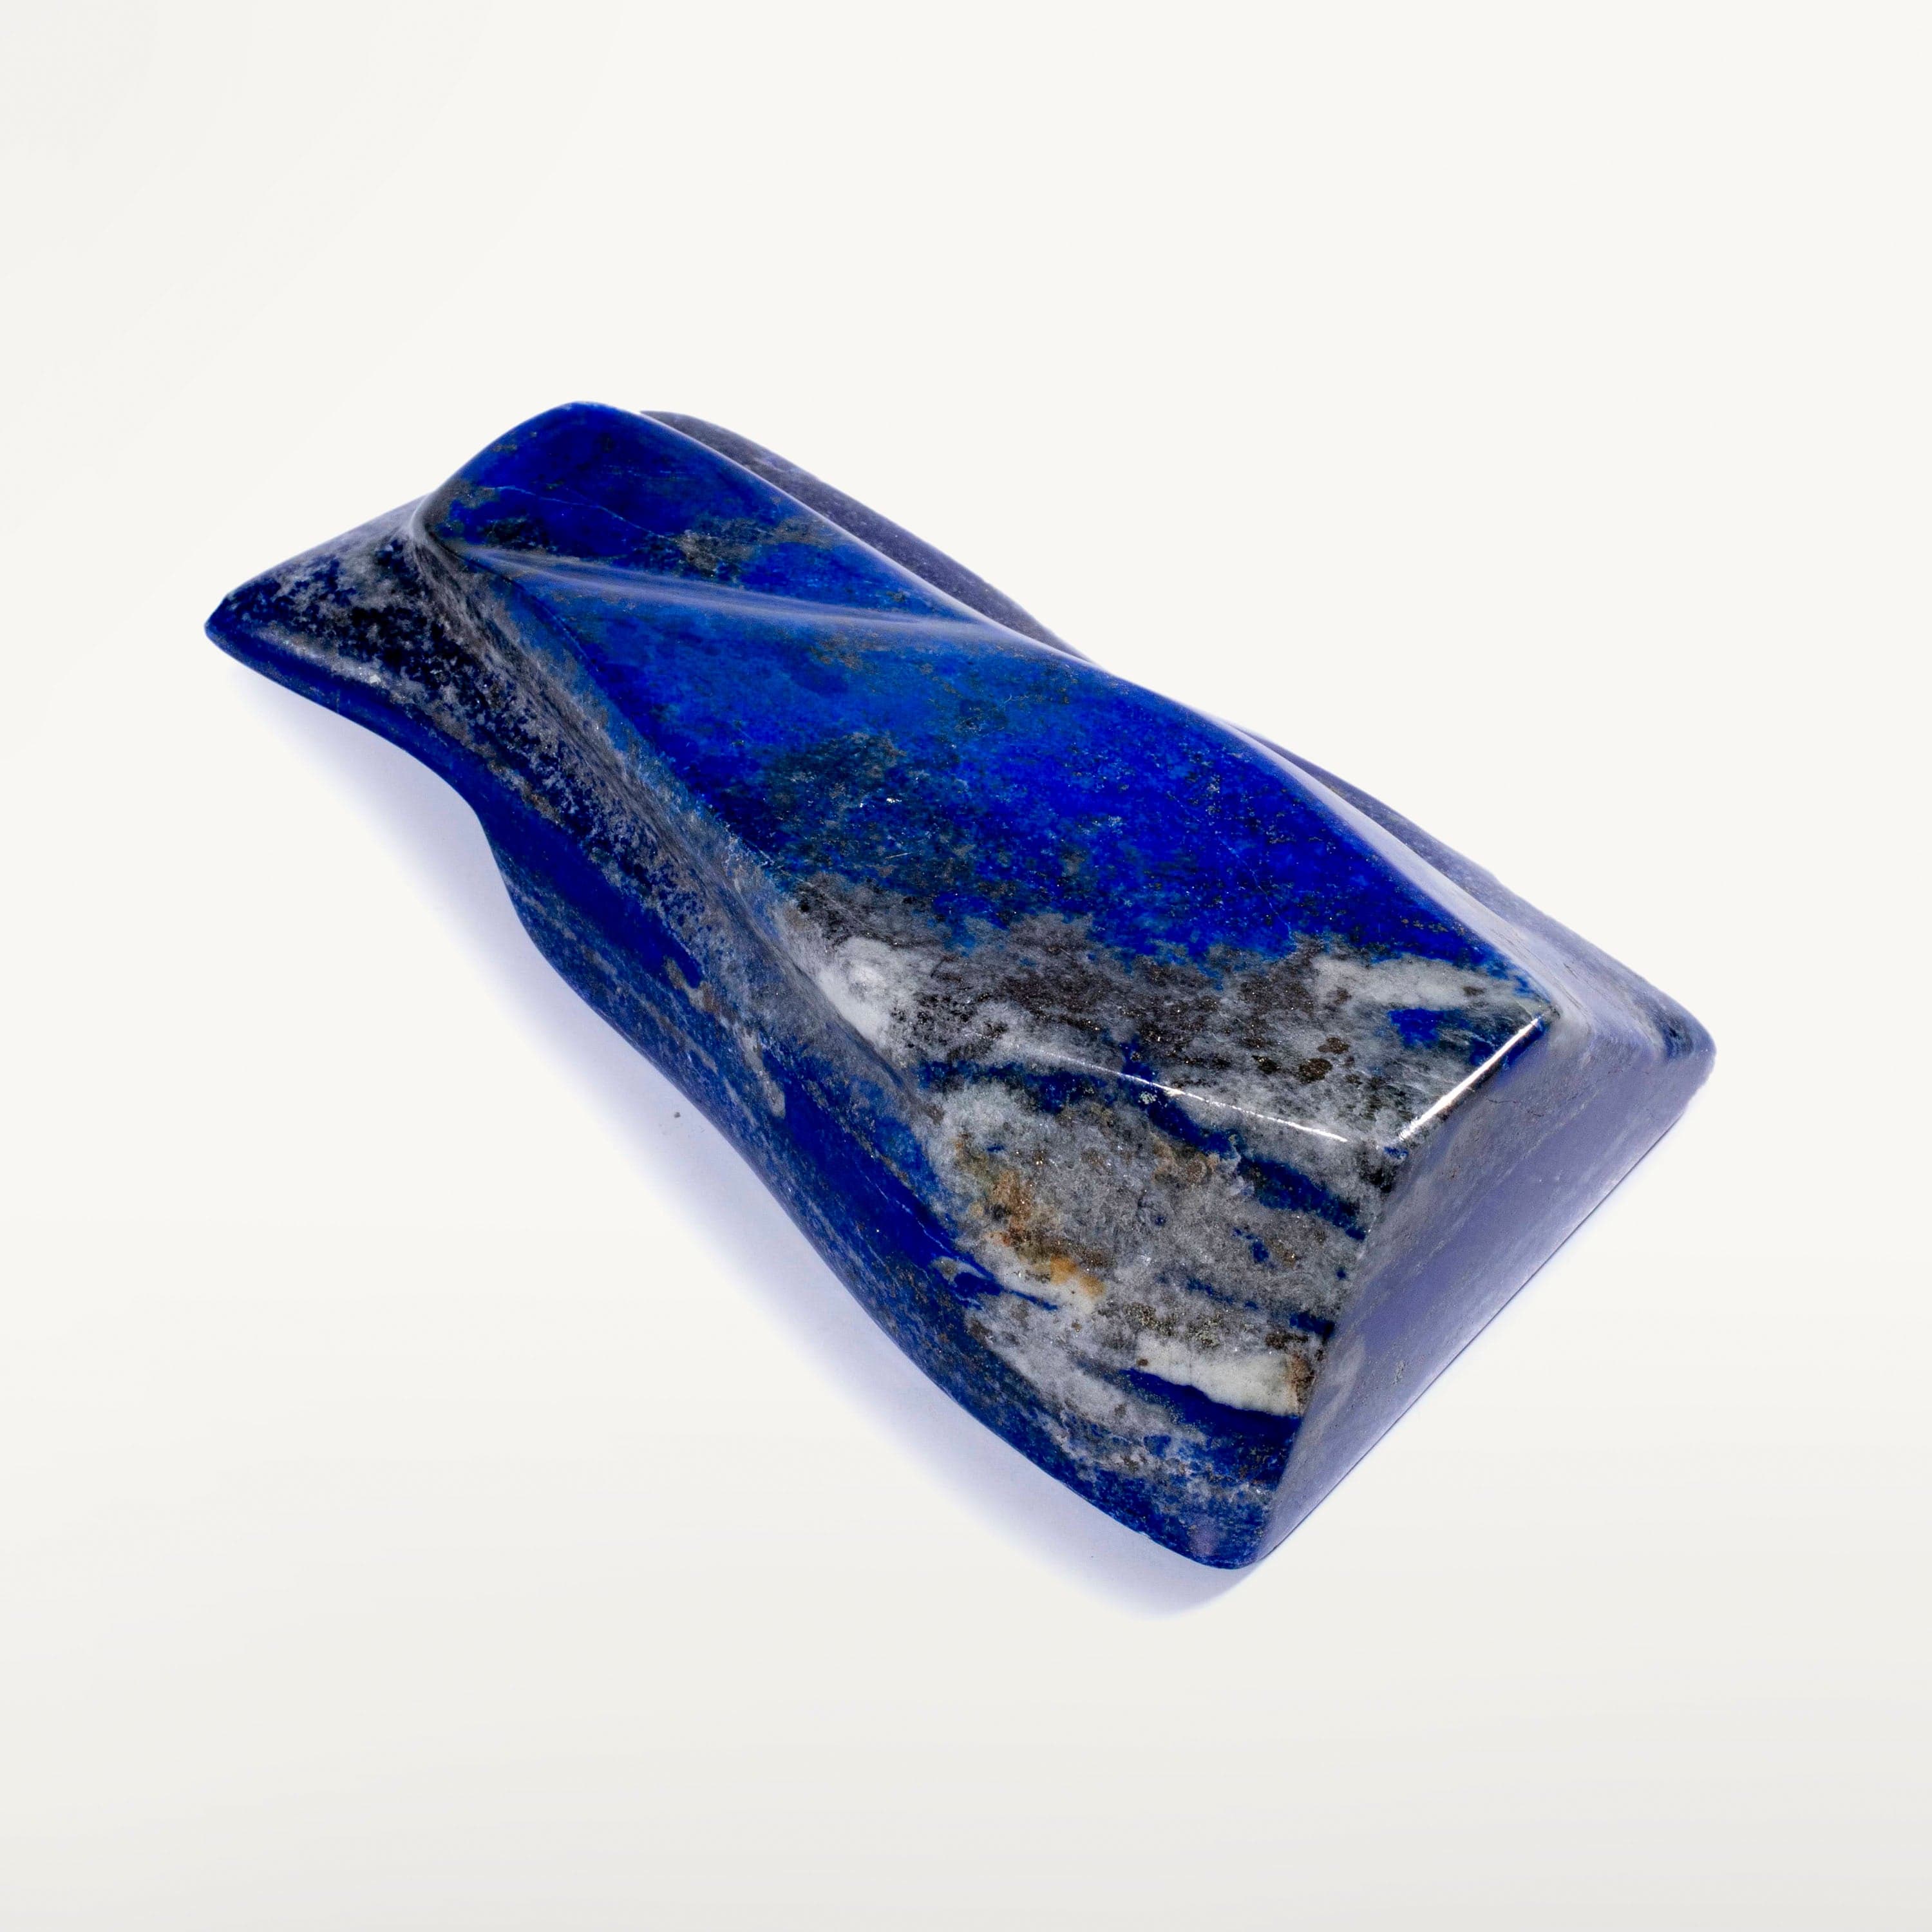 Kalifano Lapis Rare Natural Blue Polished Lapis Lazuli Freeform Carving from Afghanistan - 1460 g / 3.2 lbs LPS1600.002